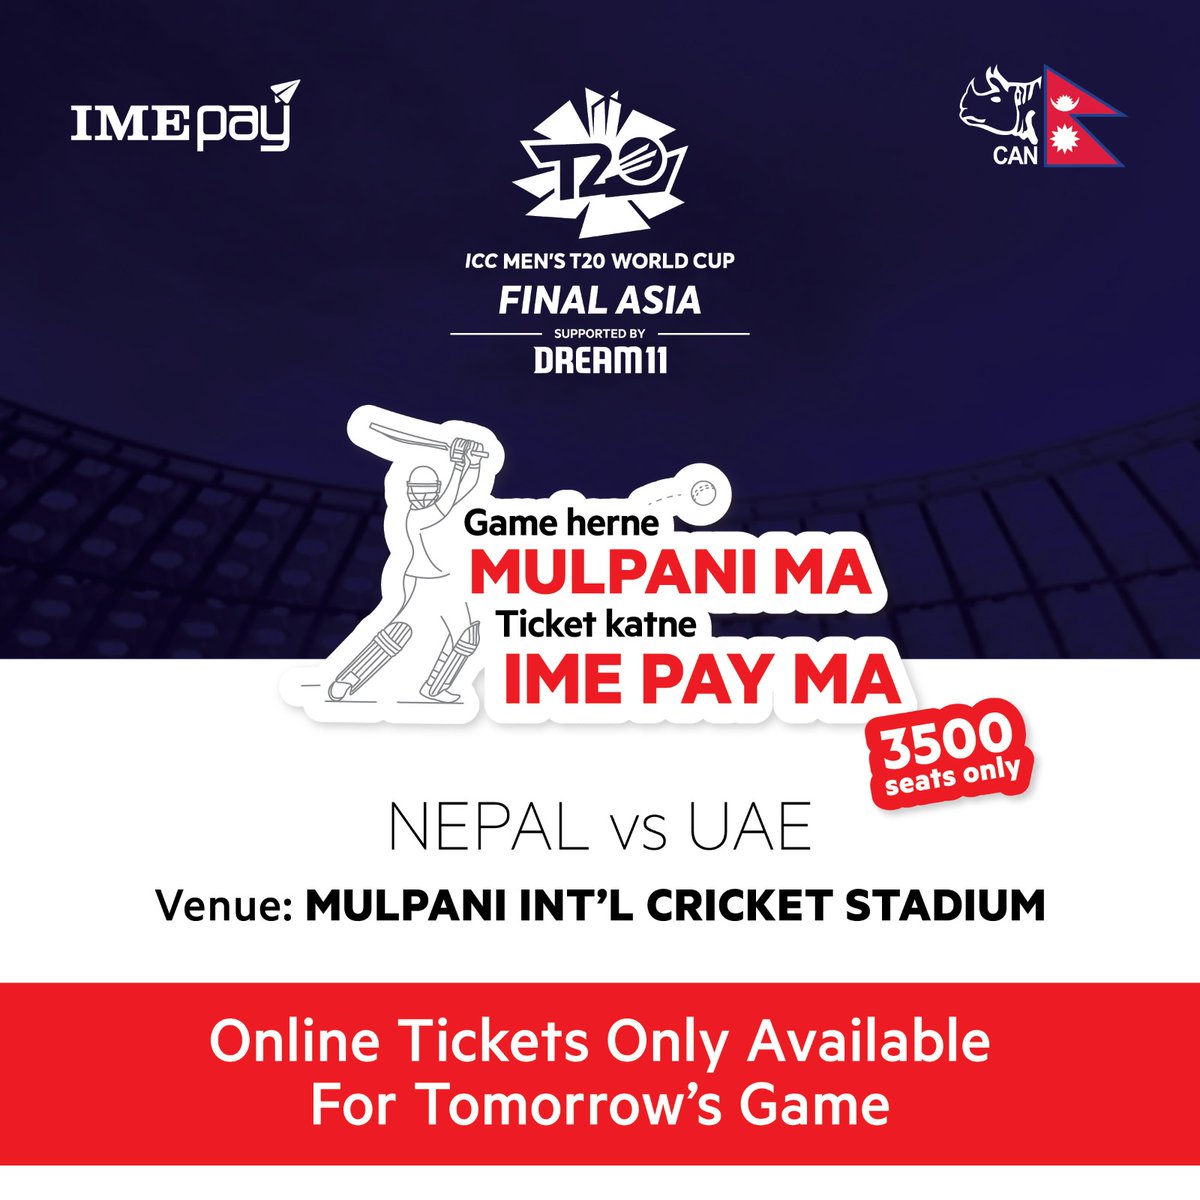 Nothing like living & breathing the ground air while we make our way for the Finals & the World Cup. Get your tickets for the Semi-Finals here:
bit.ly/t20semifinal

#imepay #weCAN #ICCT20Q #MissionWorldCup #imepaybataticket